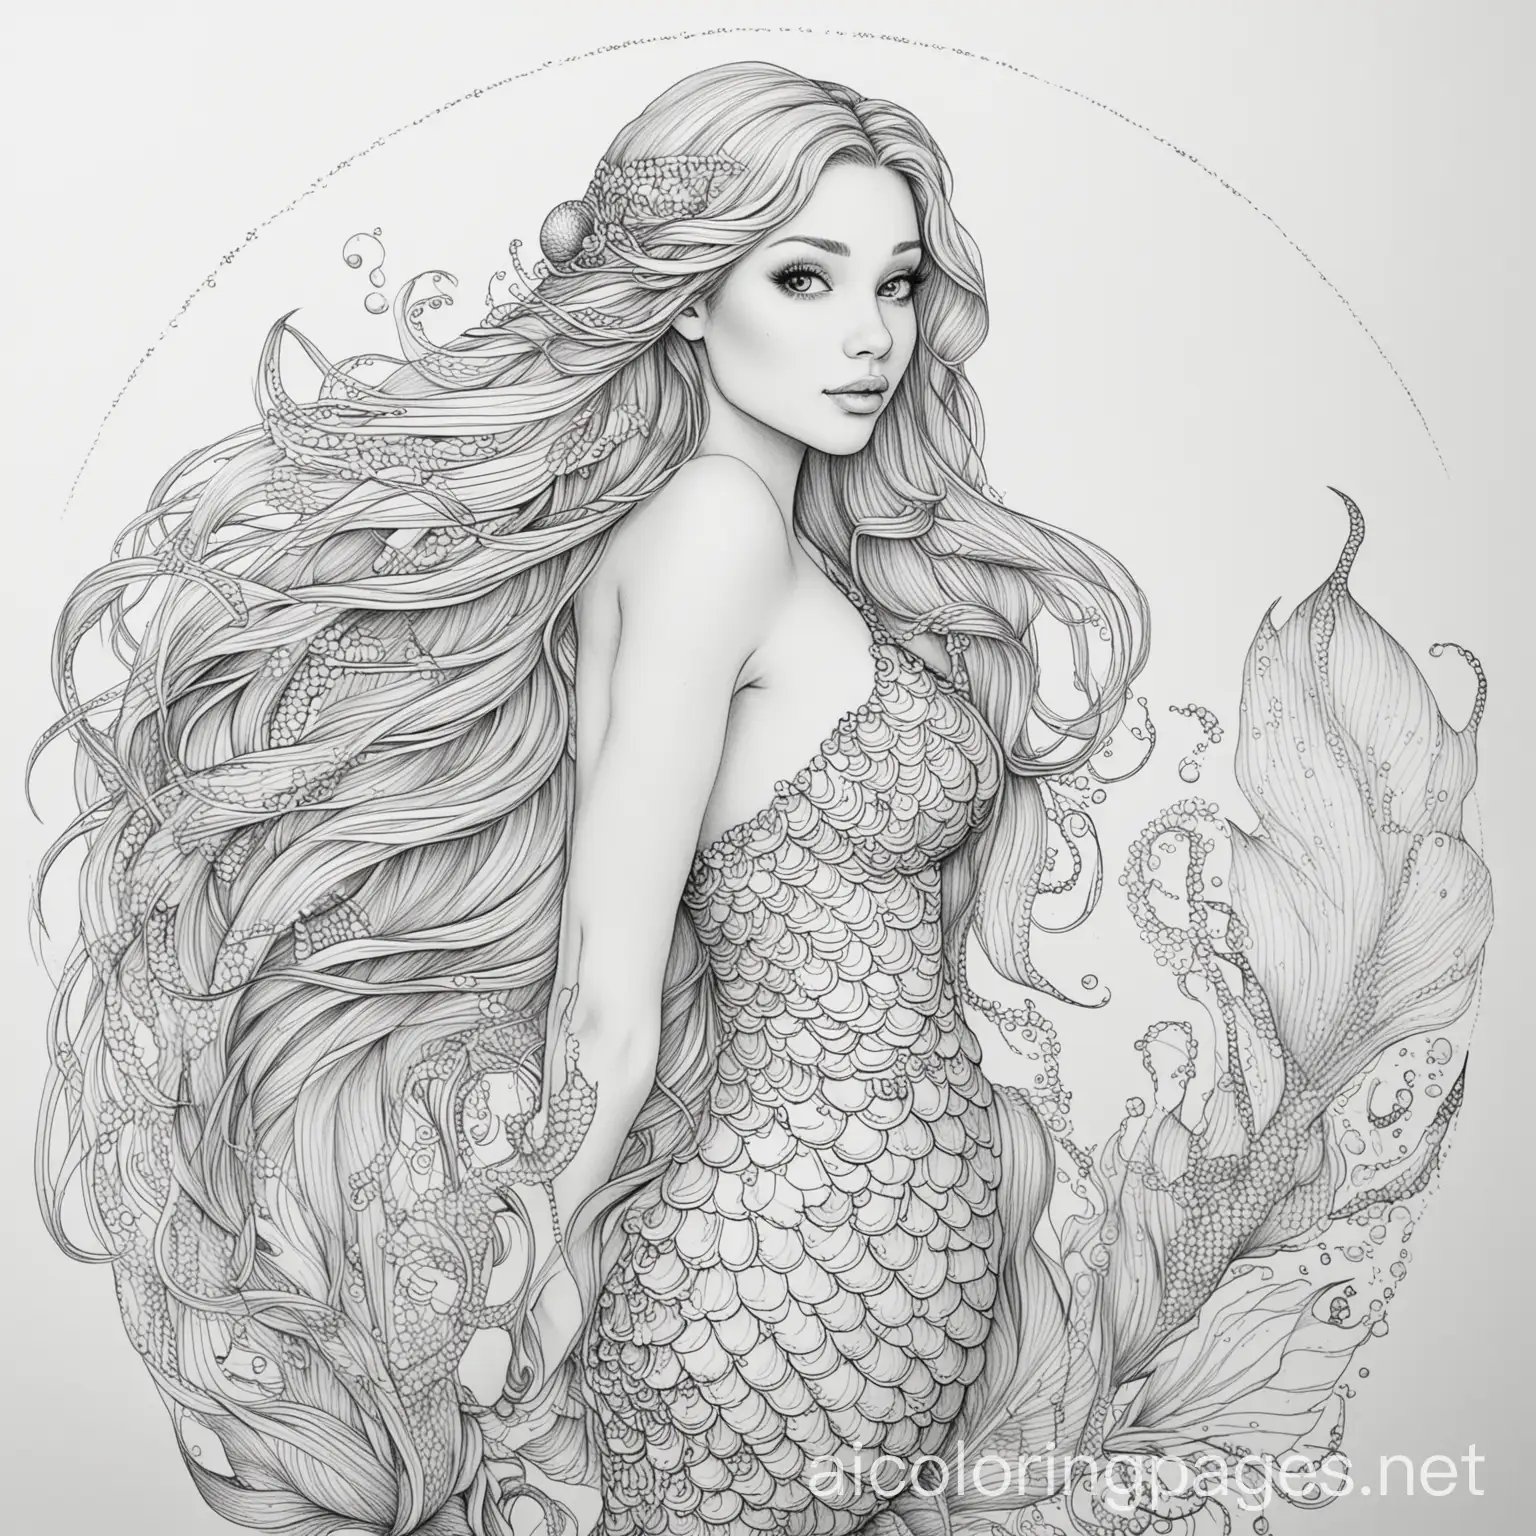 mermaid, Coloring Page, black and white, line art, white background, Simplicity, Ample White Space